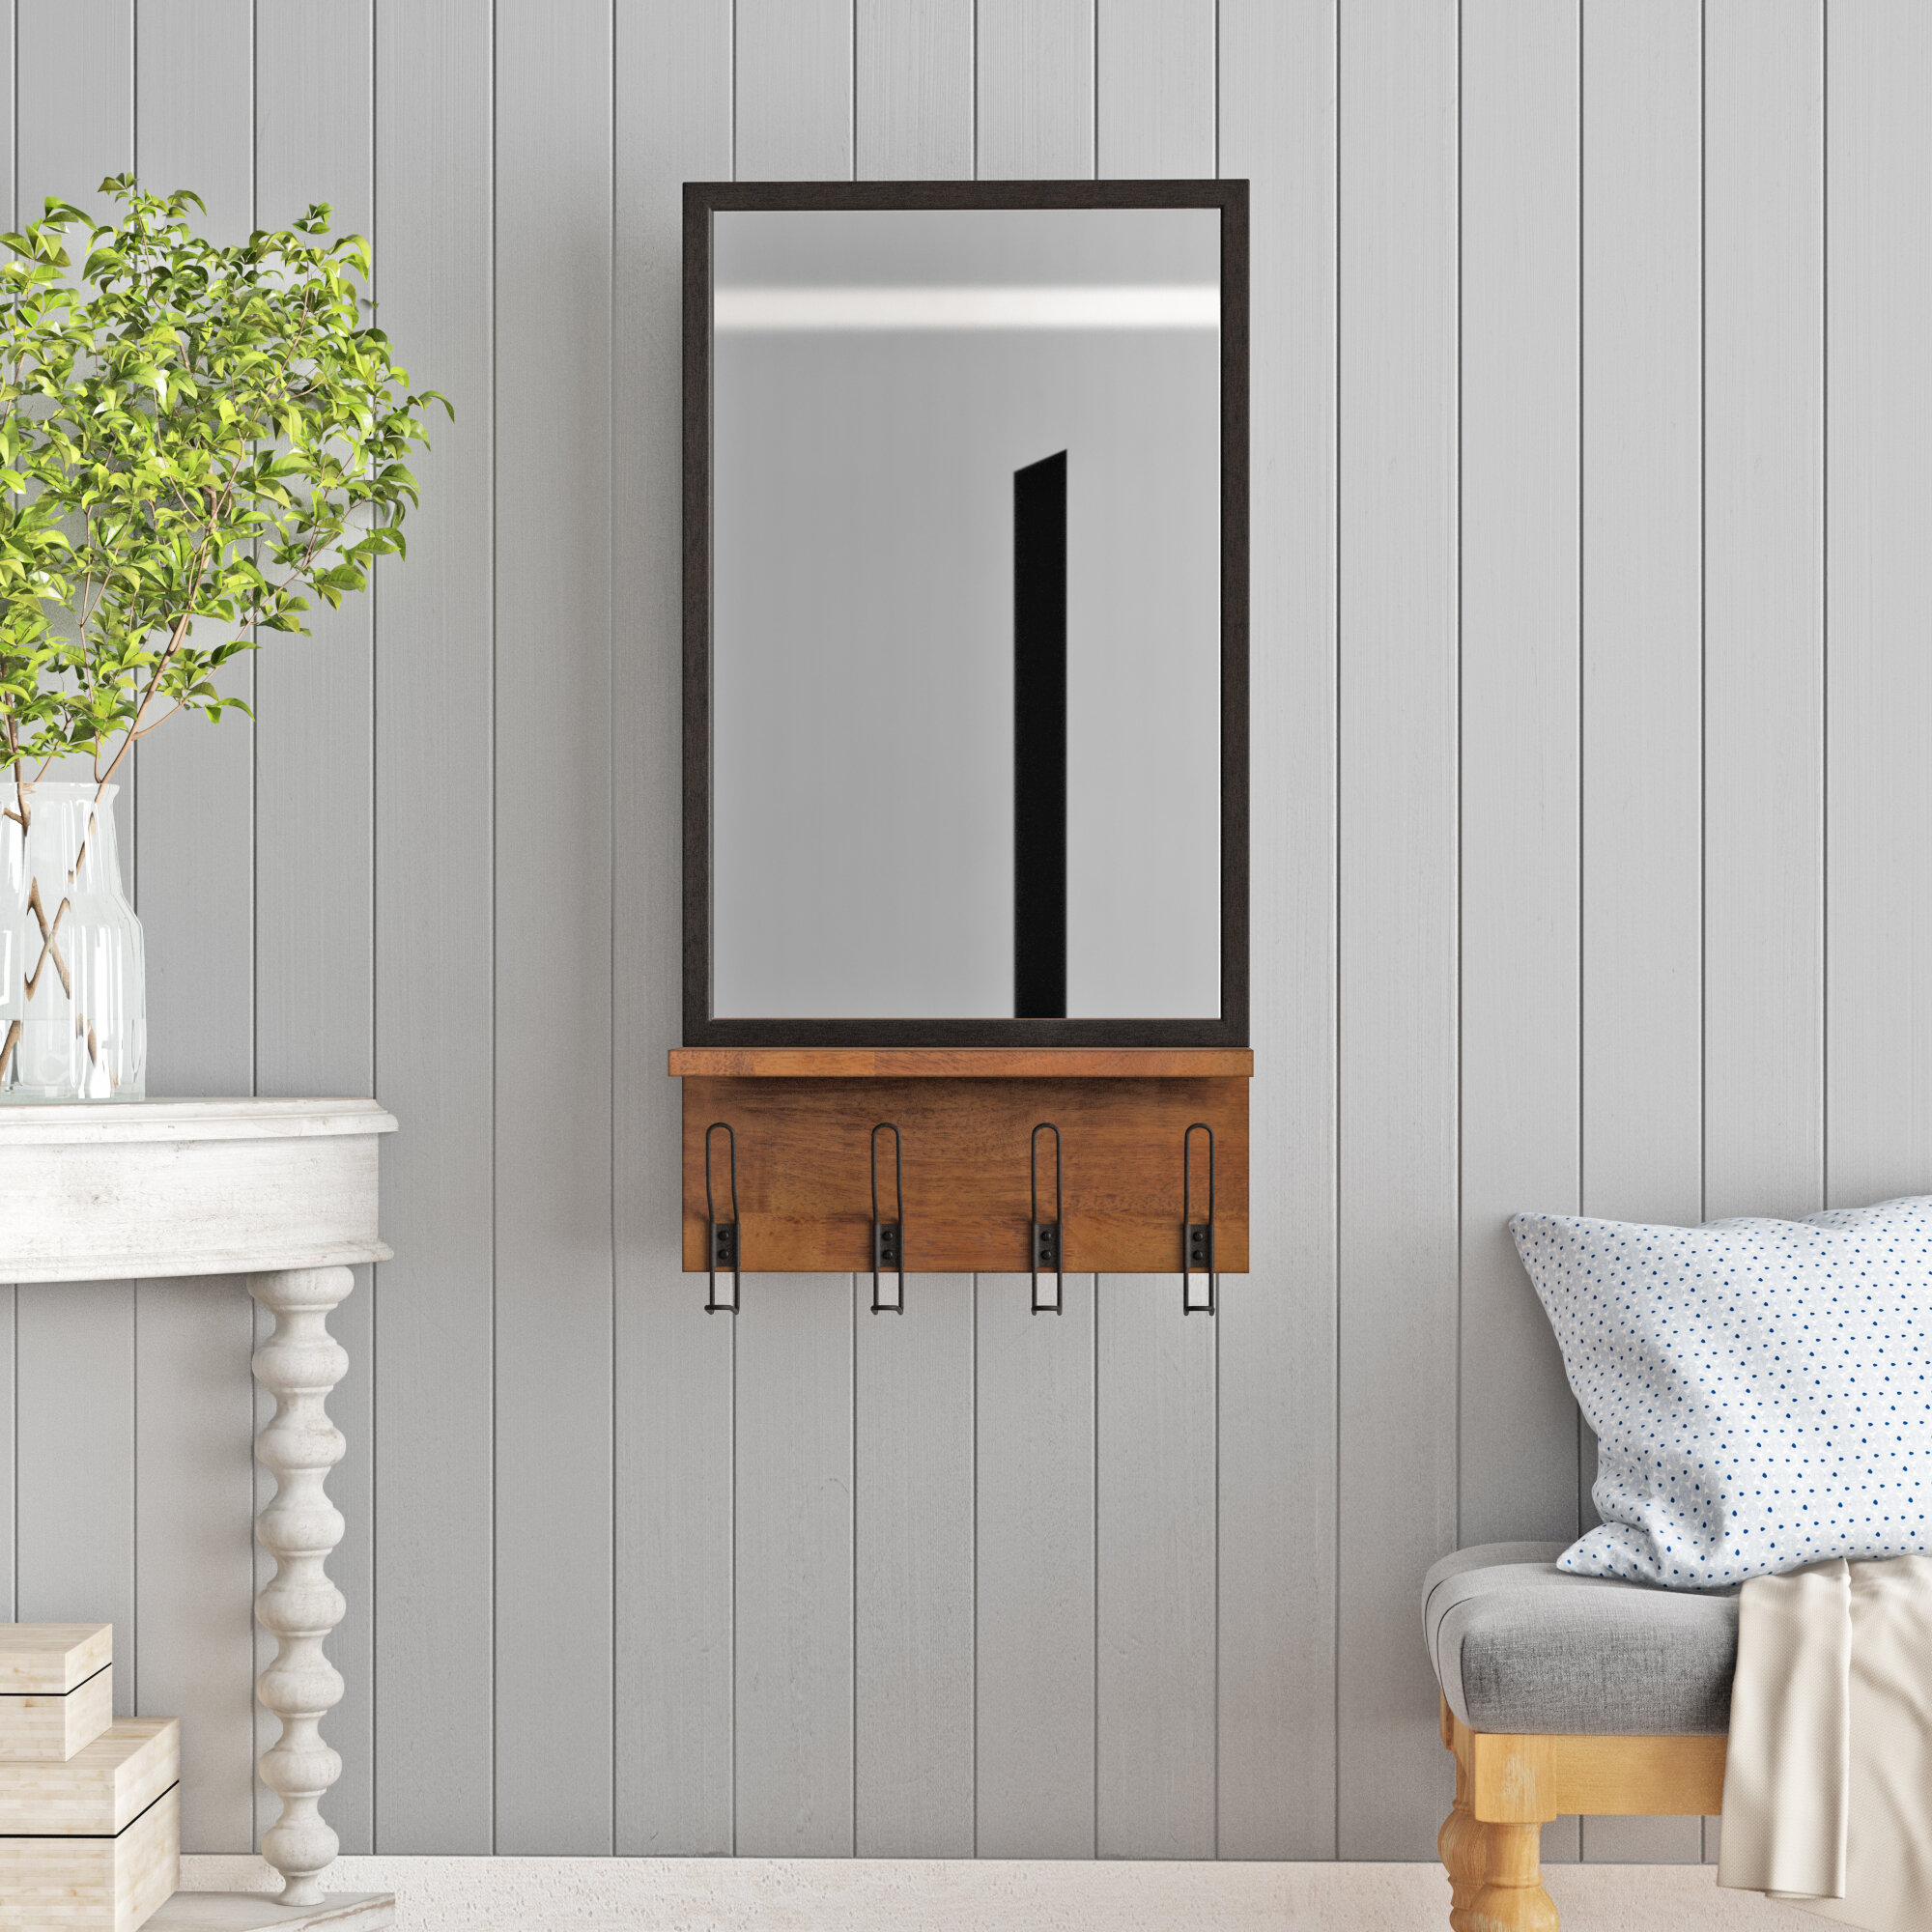 Emerson Industrial Accent Mirror With Shelves Reviews Joss Main